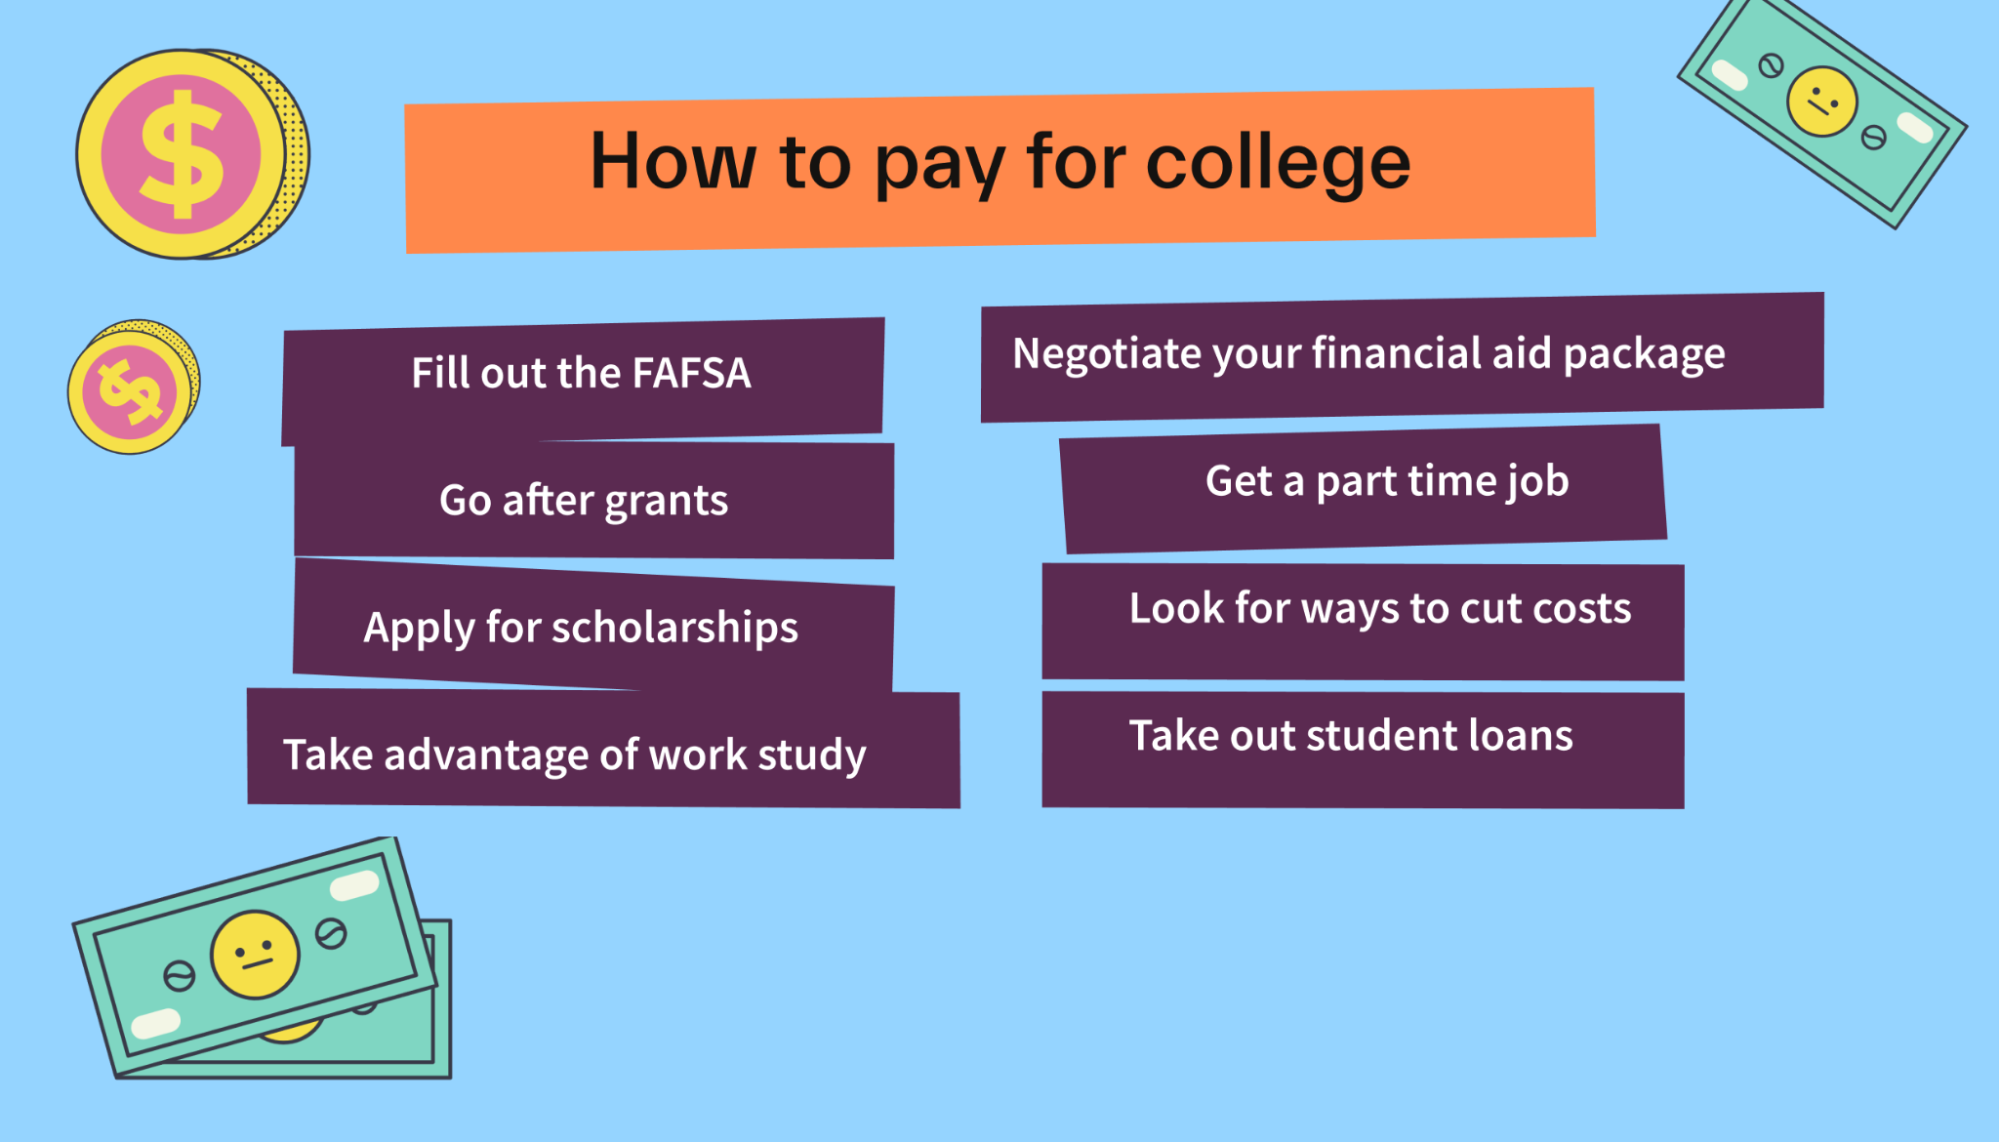 How to Pay for College